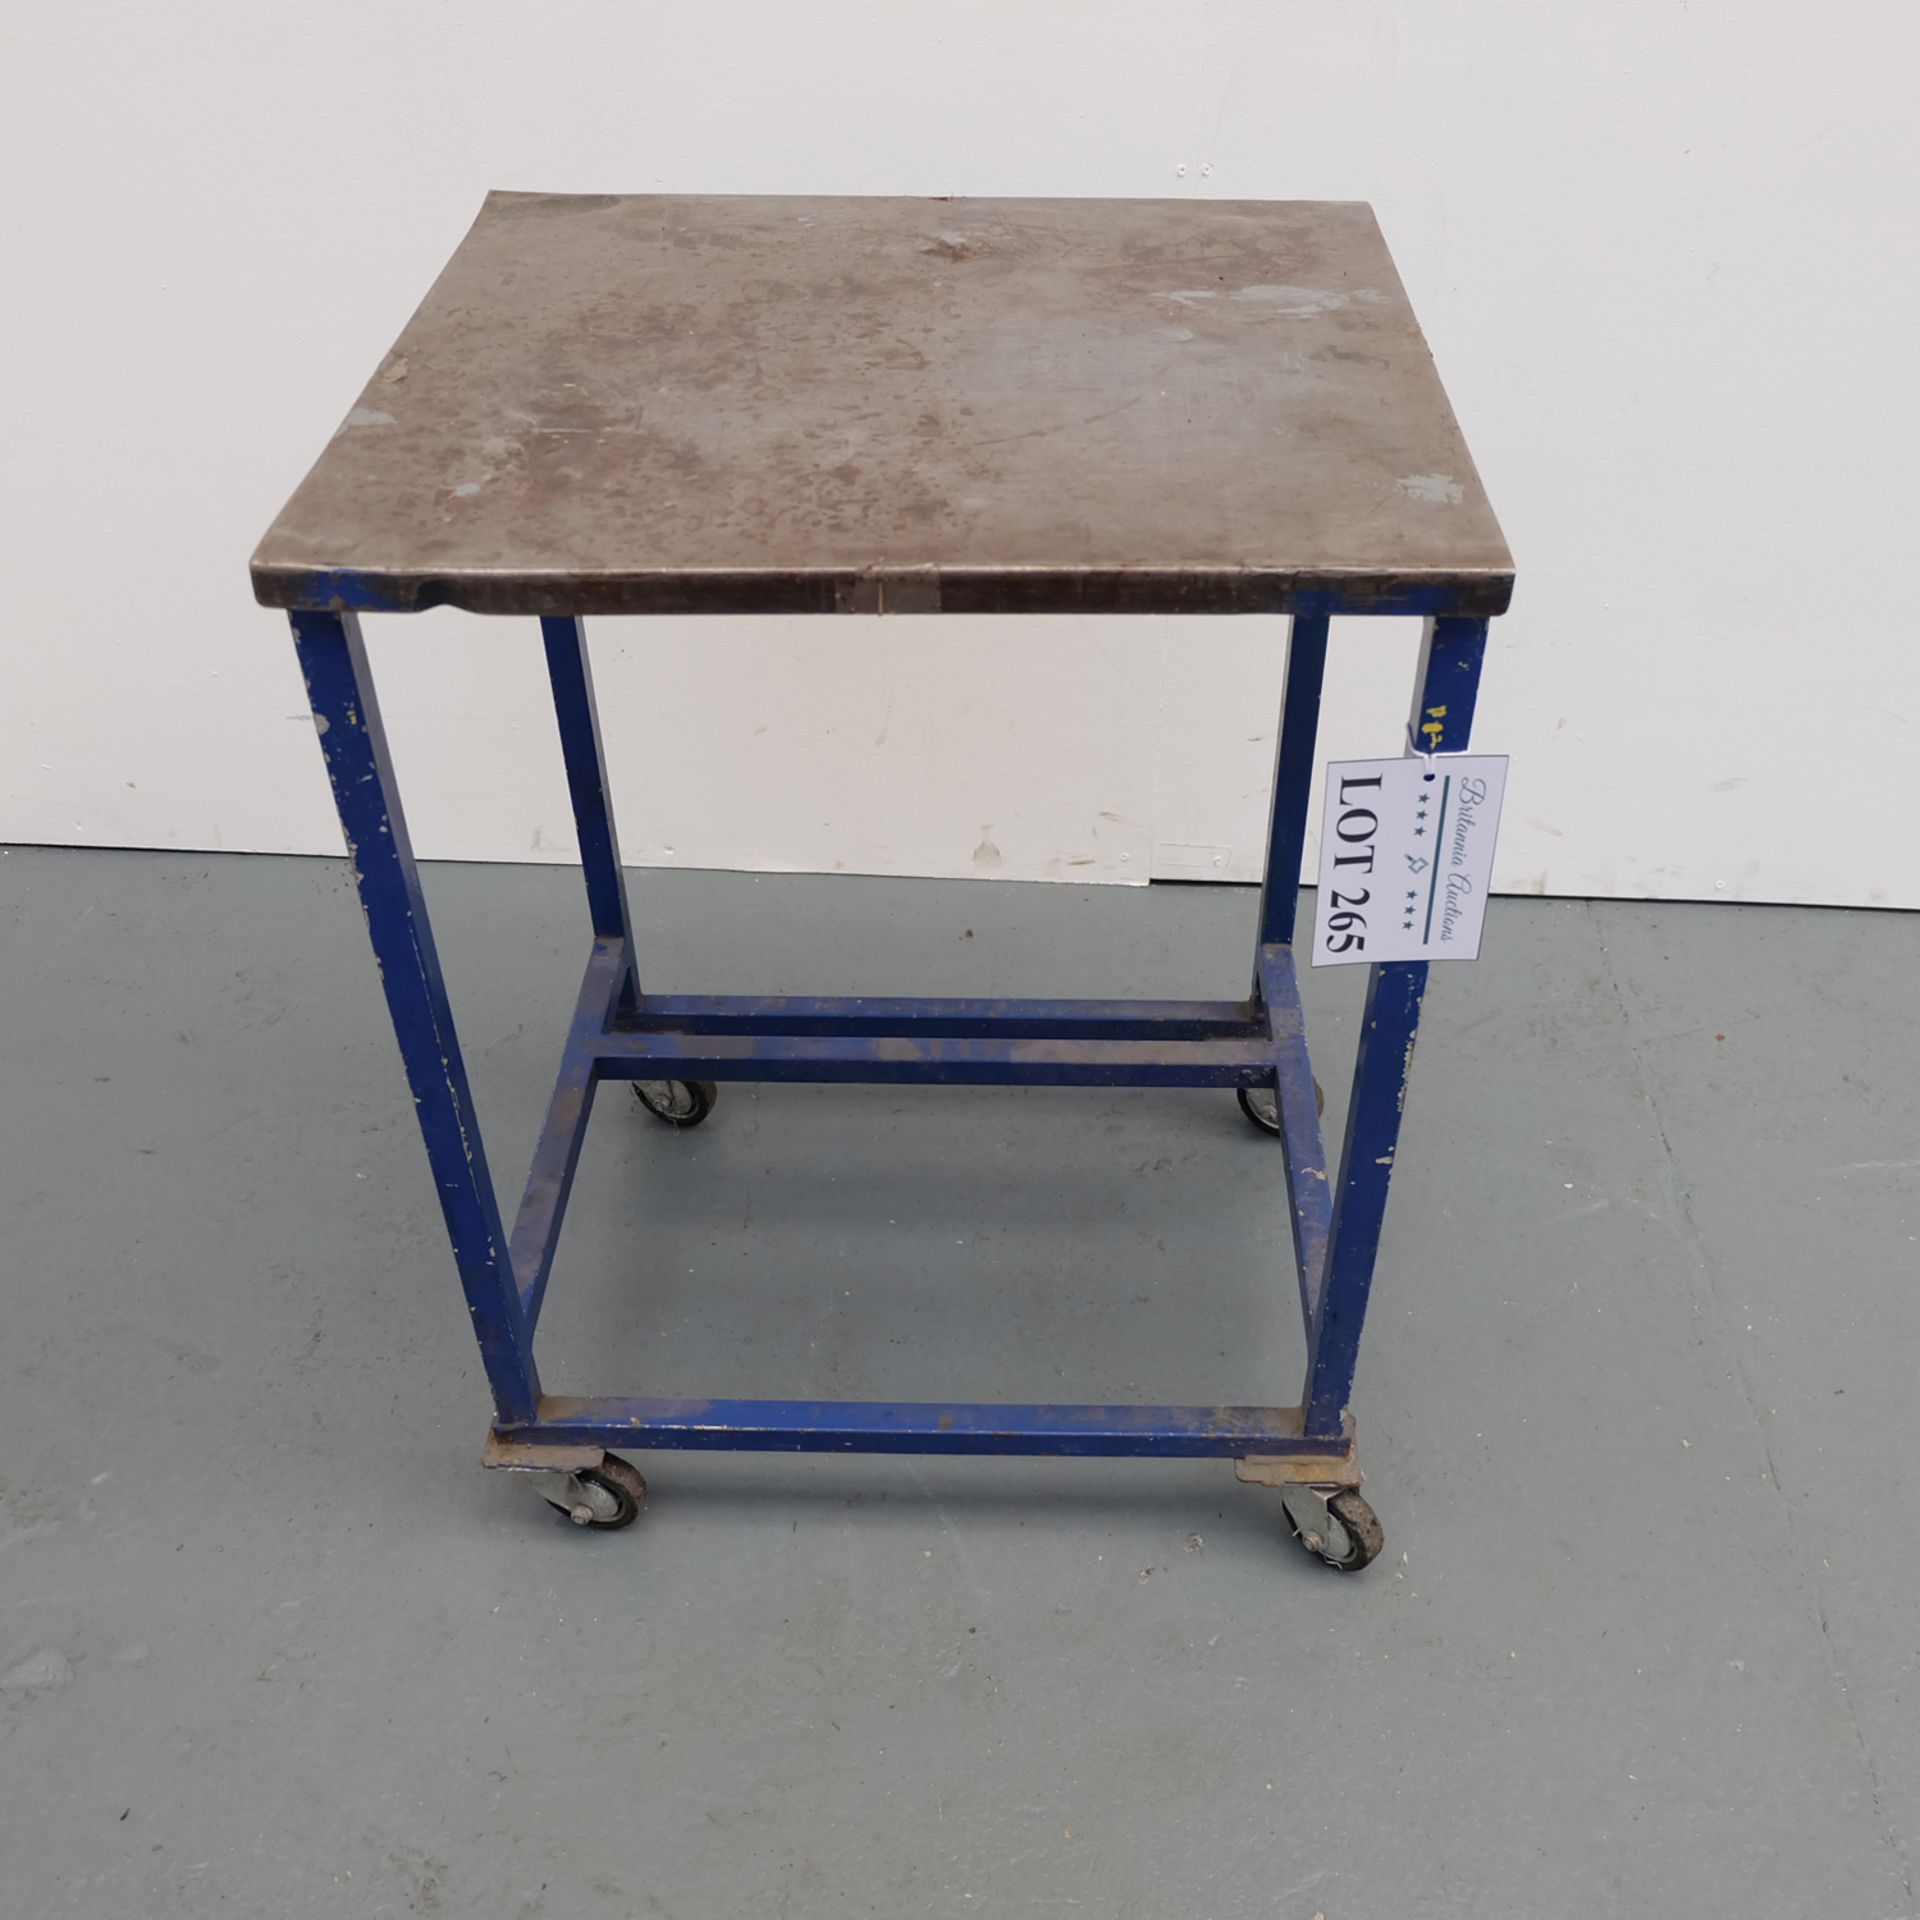 Mobile Steel Trolley on Castors. Approx Dimensions560mm x 490mm x 770mm High.